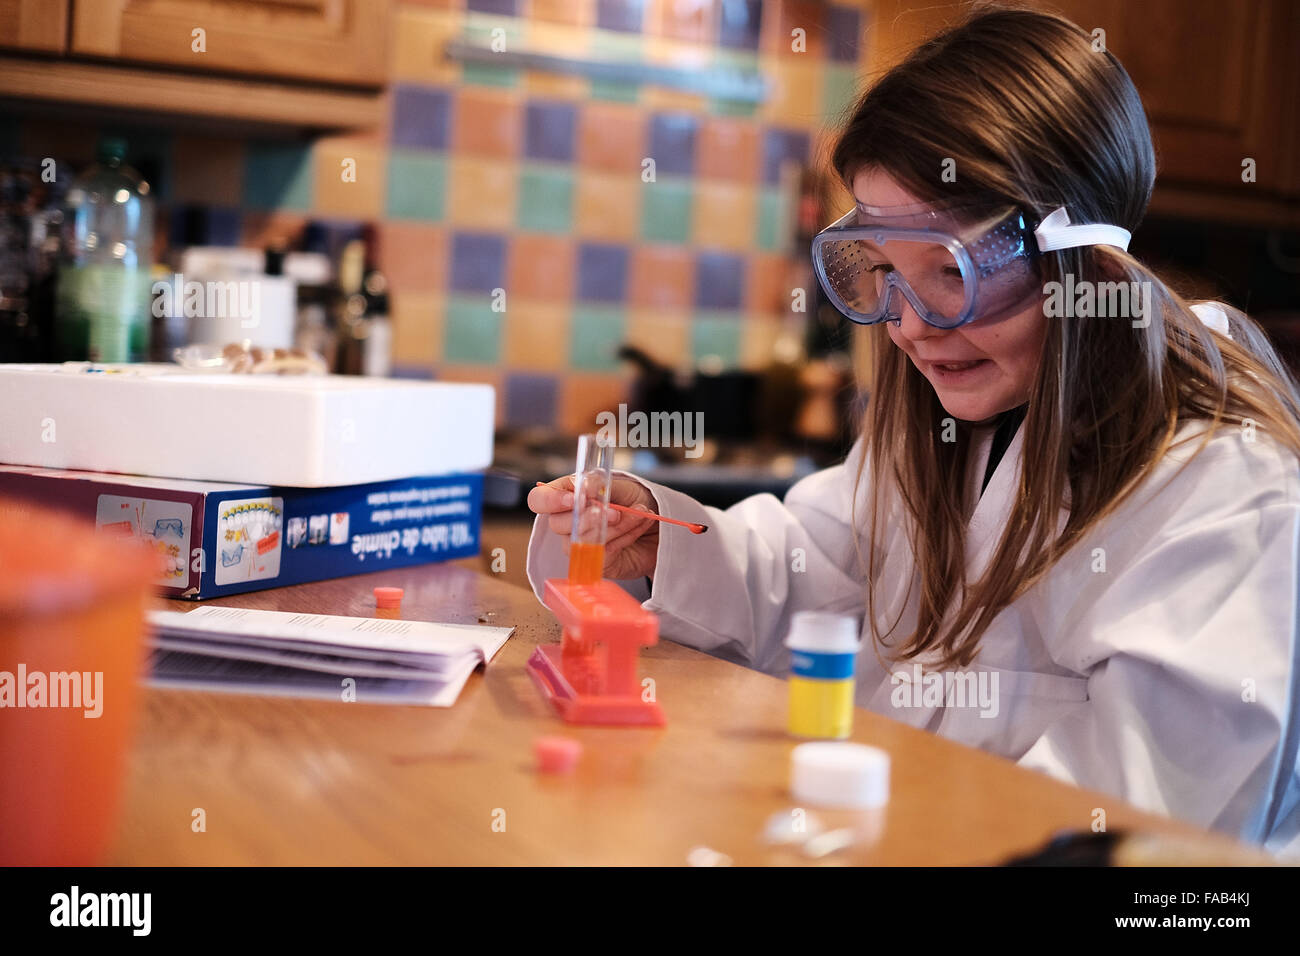 Young girl in white lab coat playing with chemistry science set Stock Photo